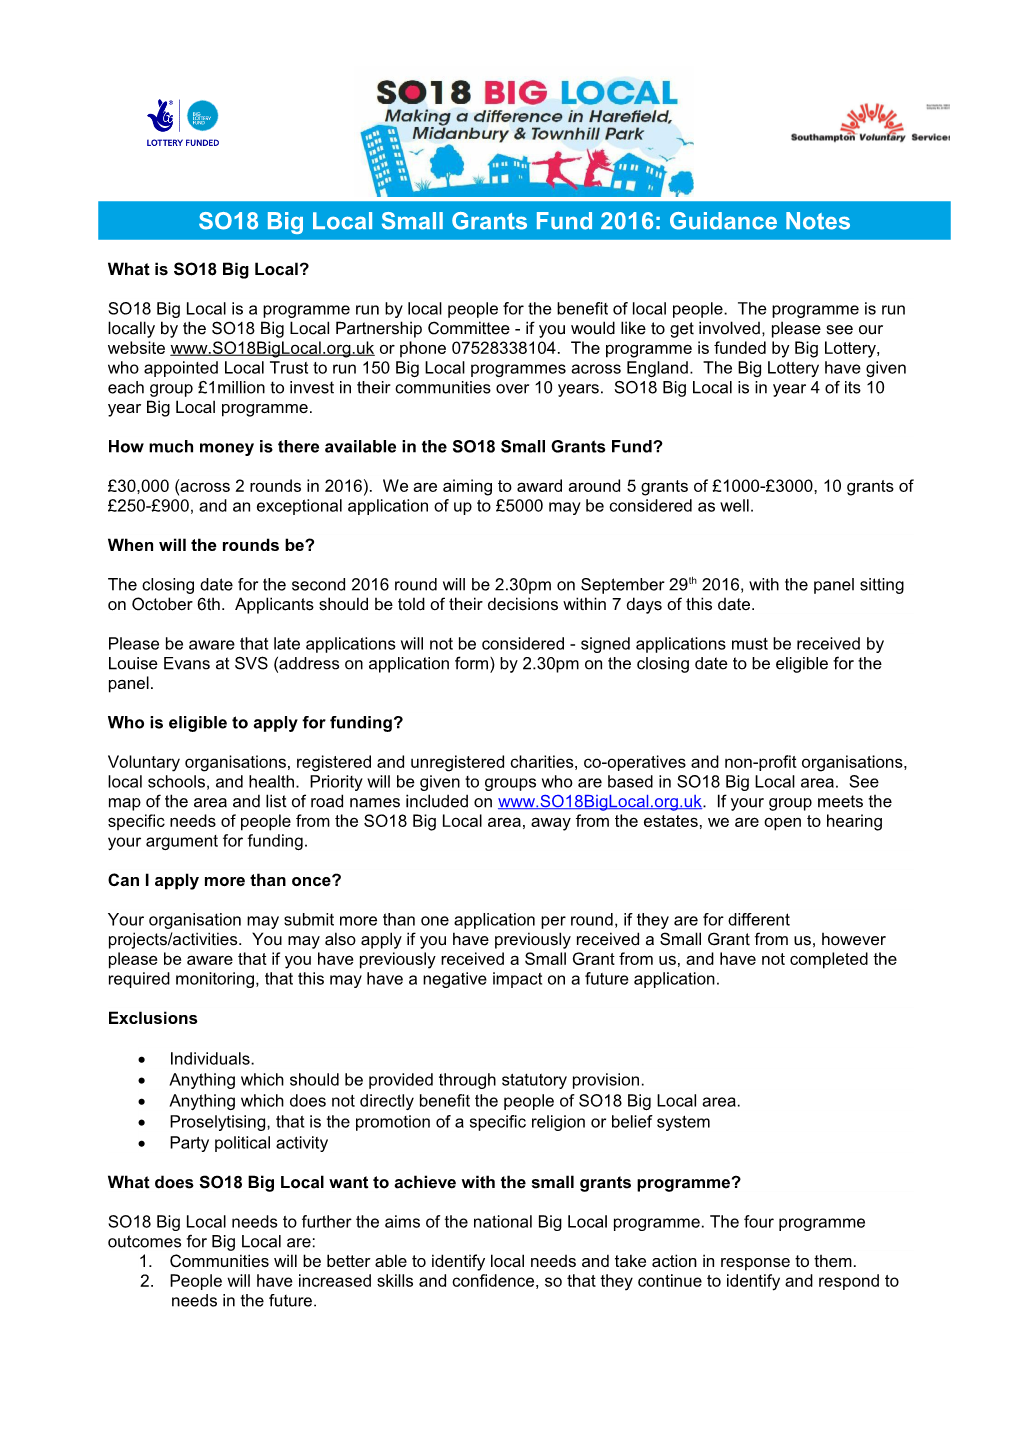 SO18 Big Local Small Grants Fund Guidance Notes